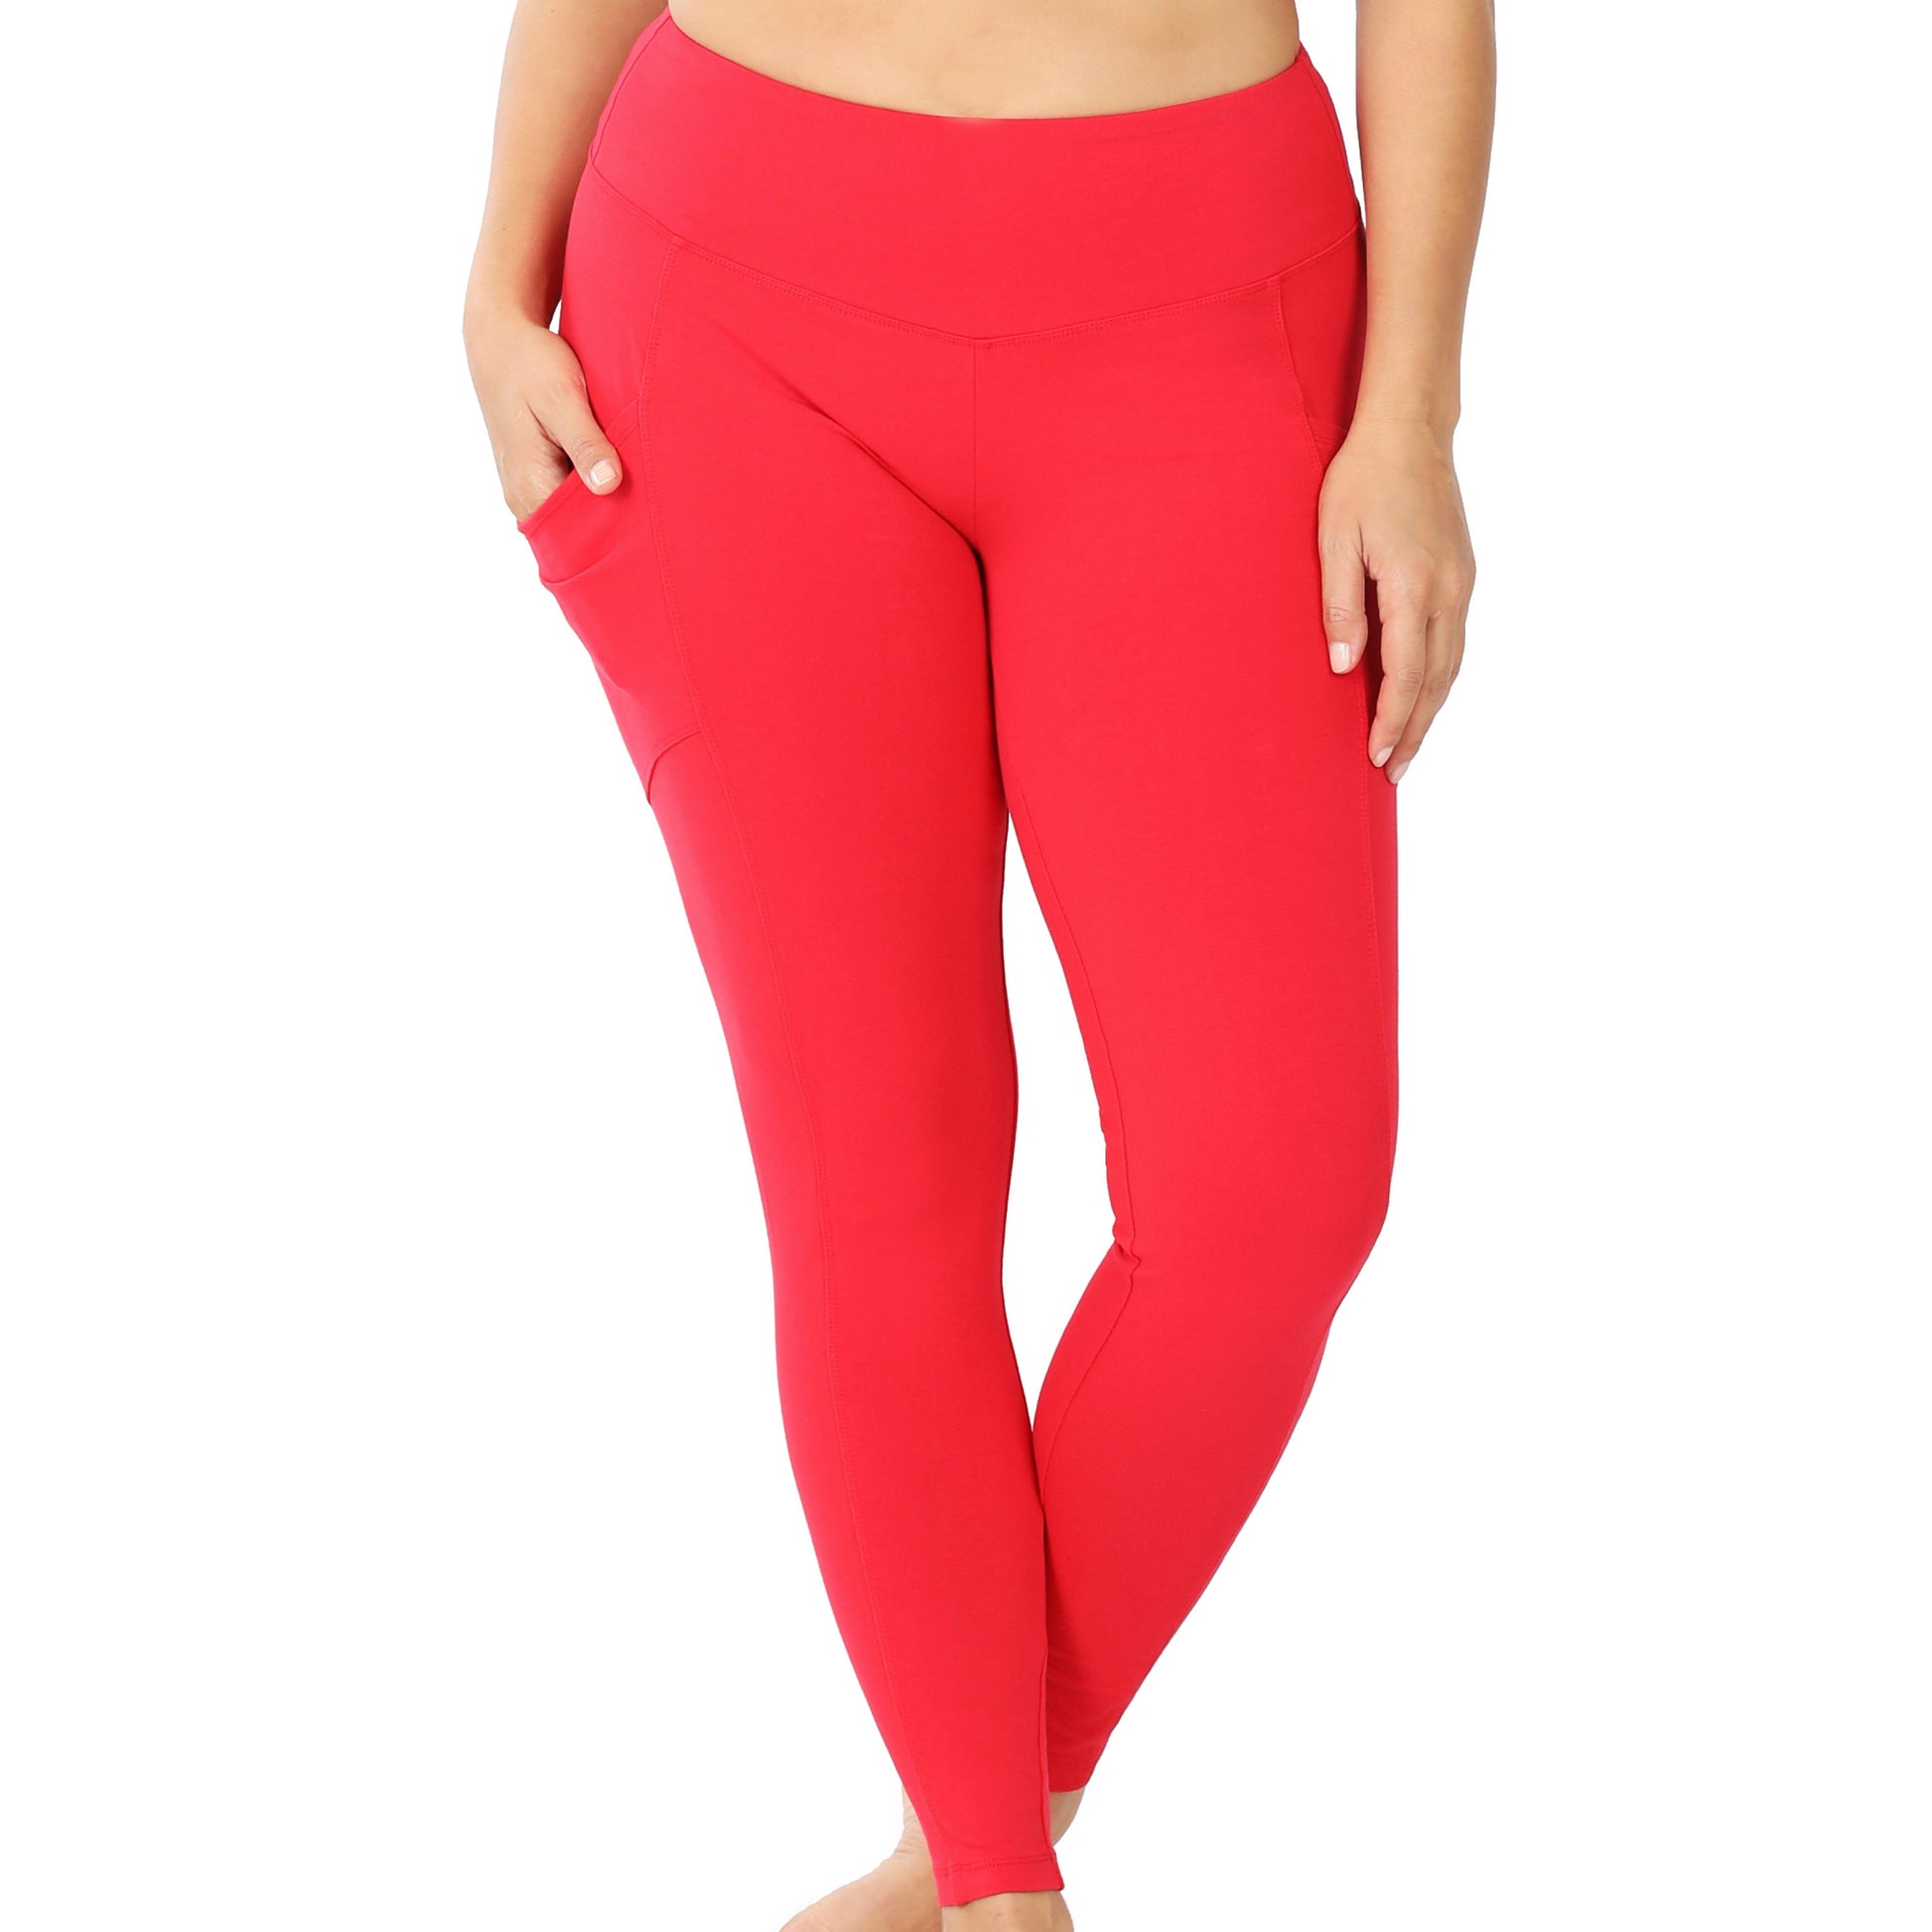 BETTER COTTON WIDE WAISTBAND FULL LENGTH LEGGINGS WITH POCKETS